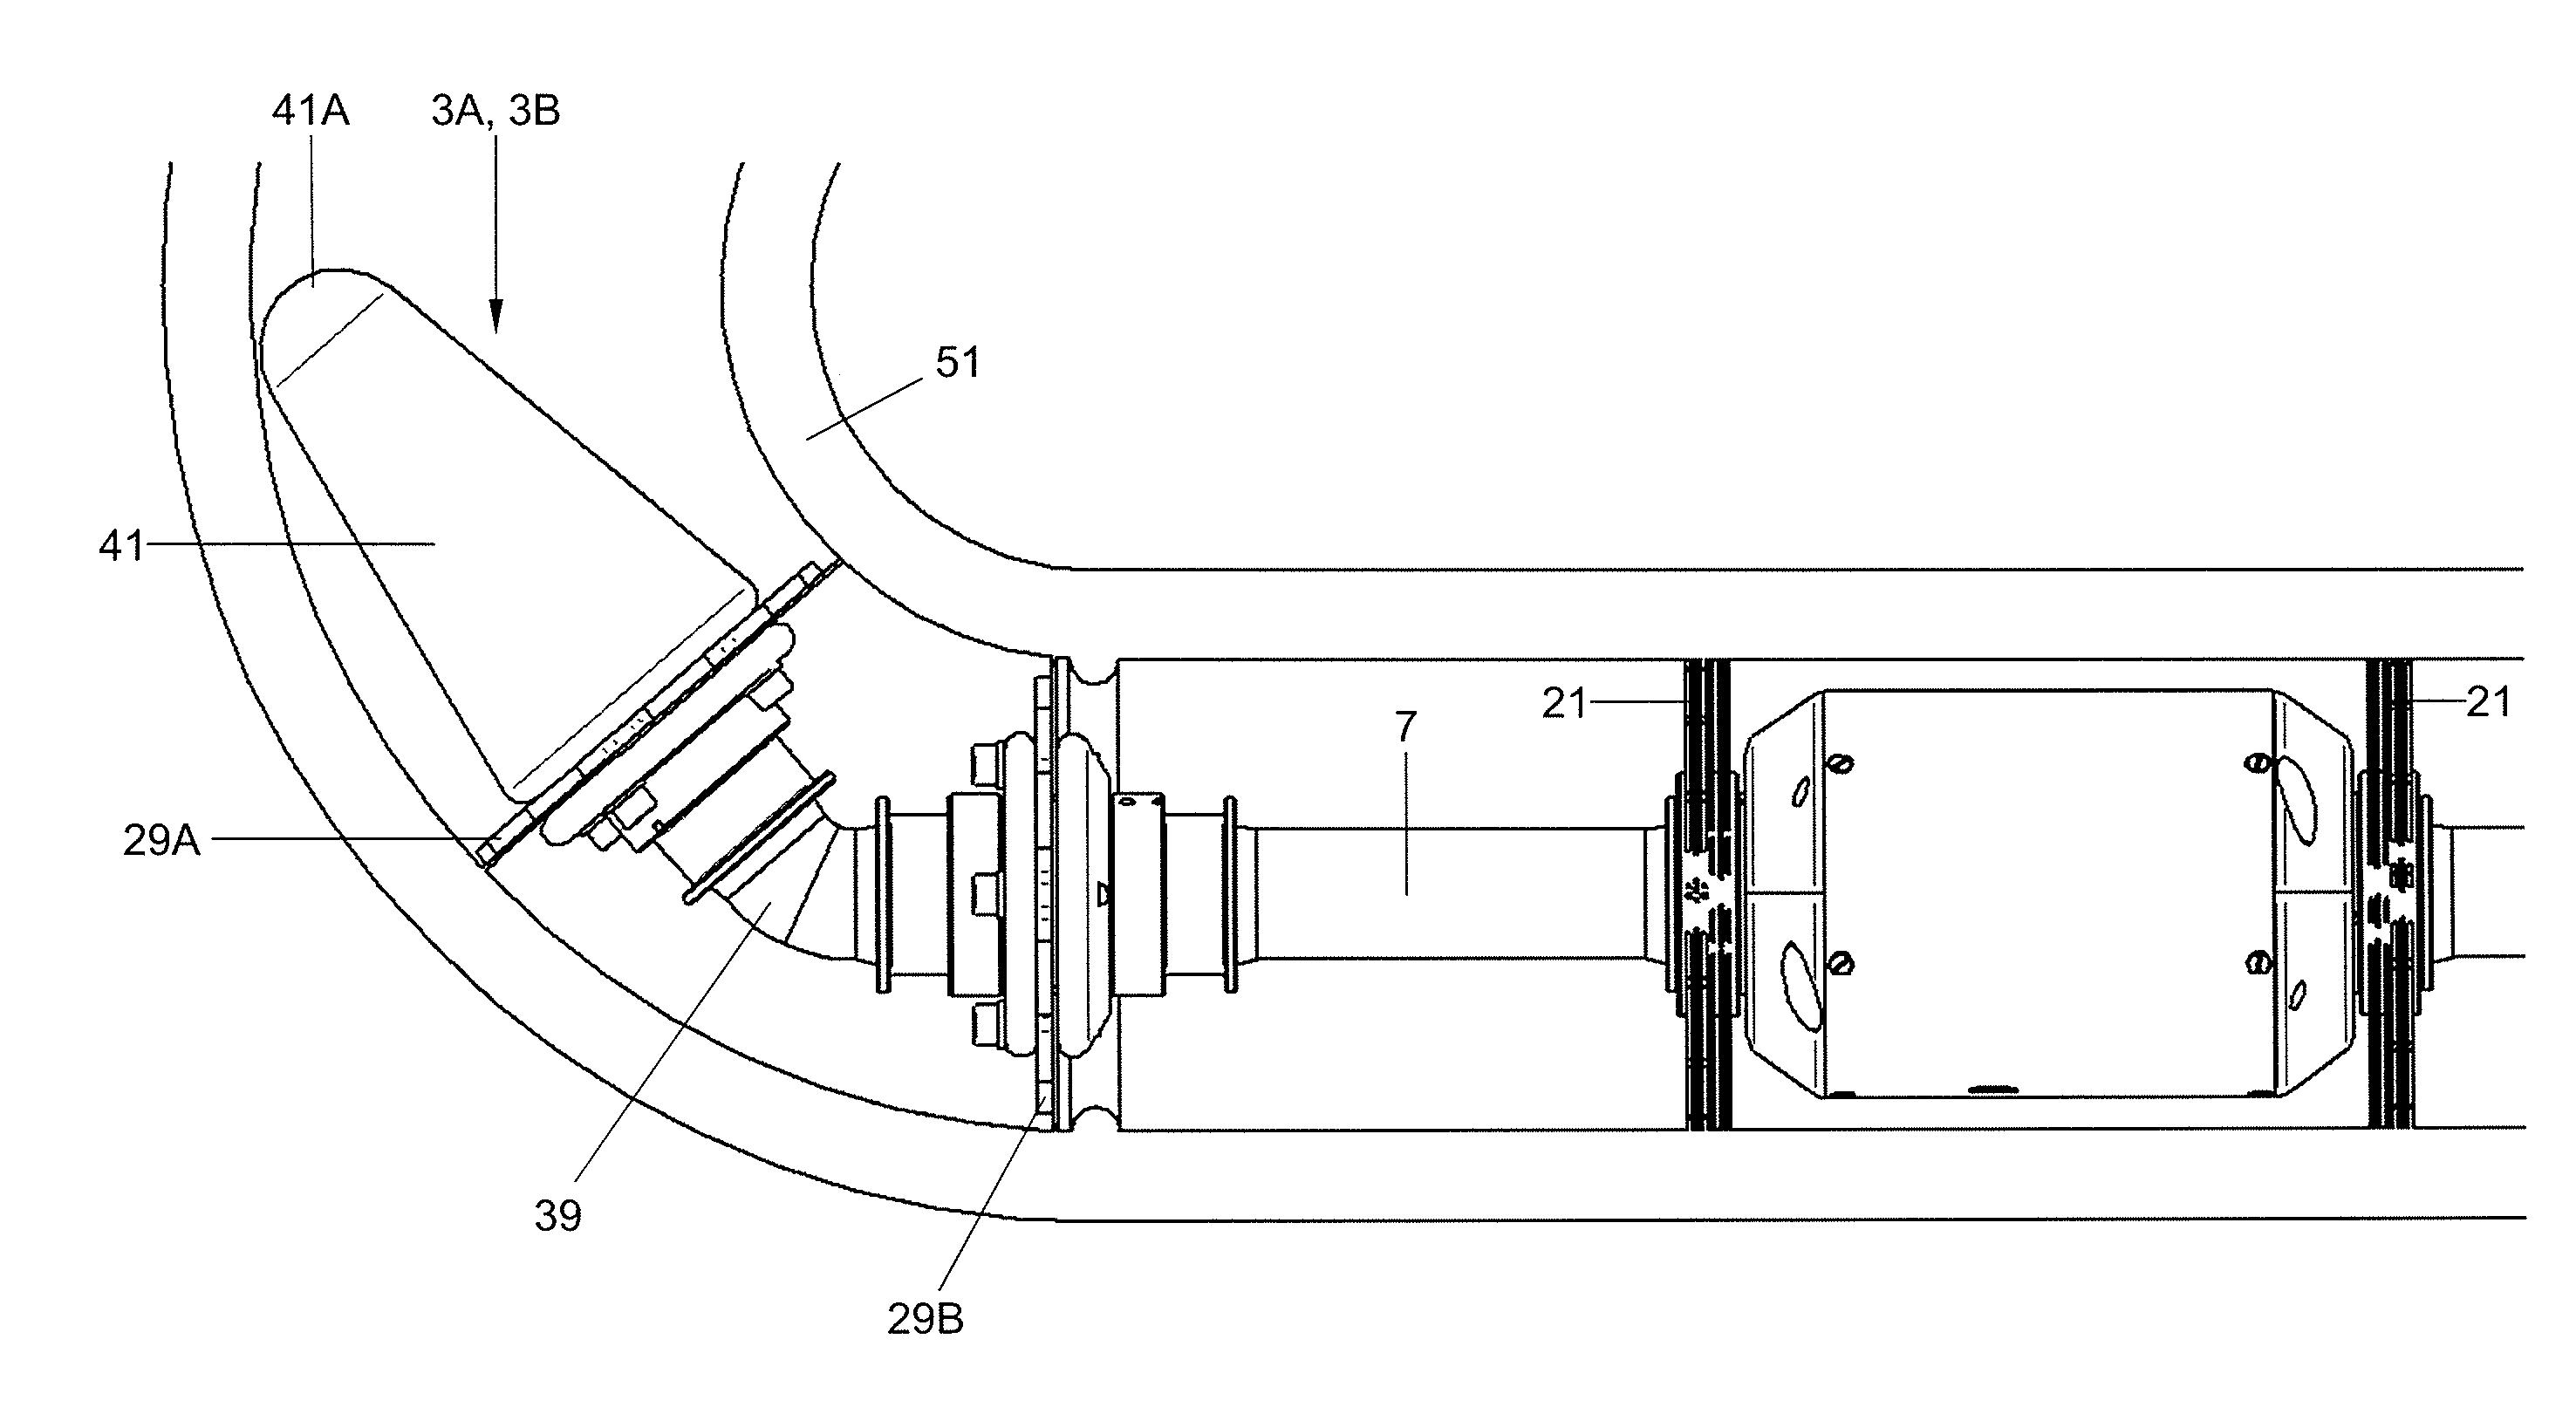 Tool, method, and system for in-line inspection or treatment of a pipeline